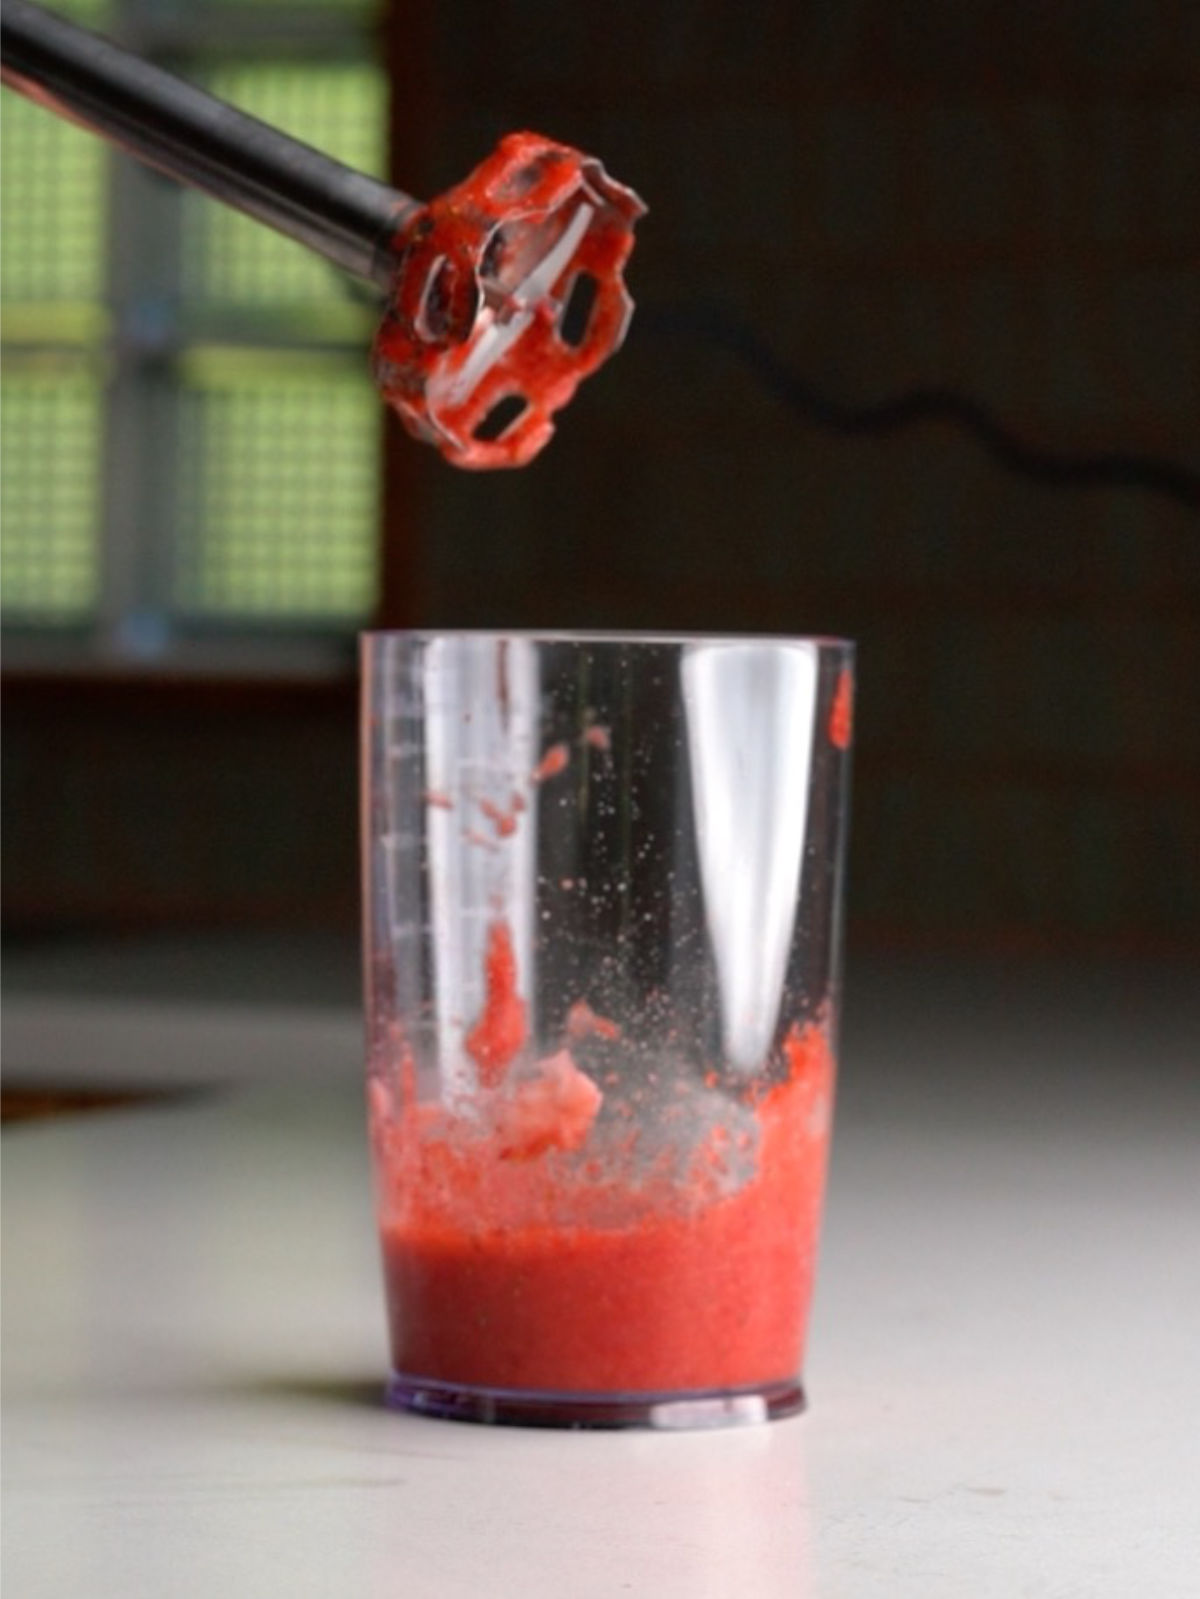 Strawberry puree in a clear container with an immersion blender above it.